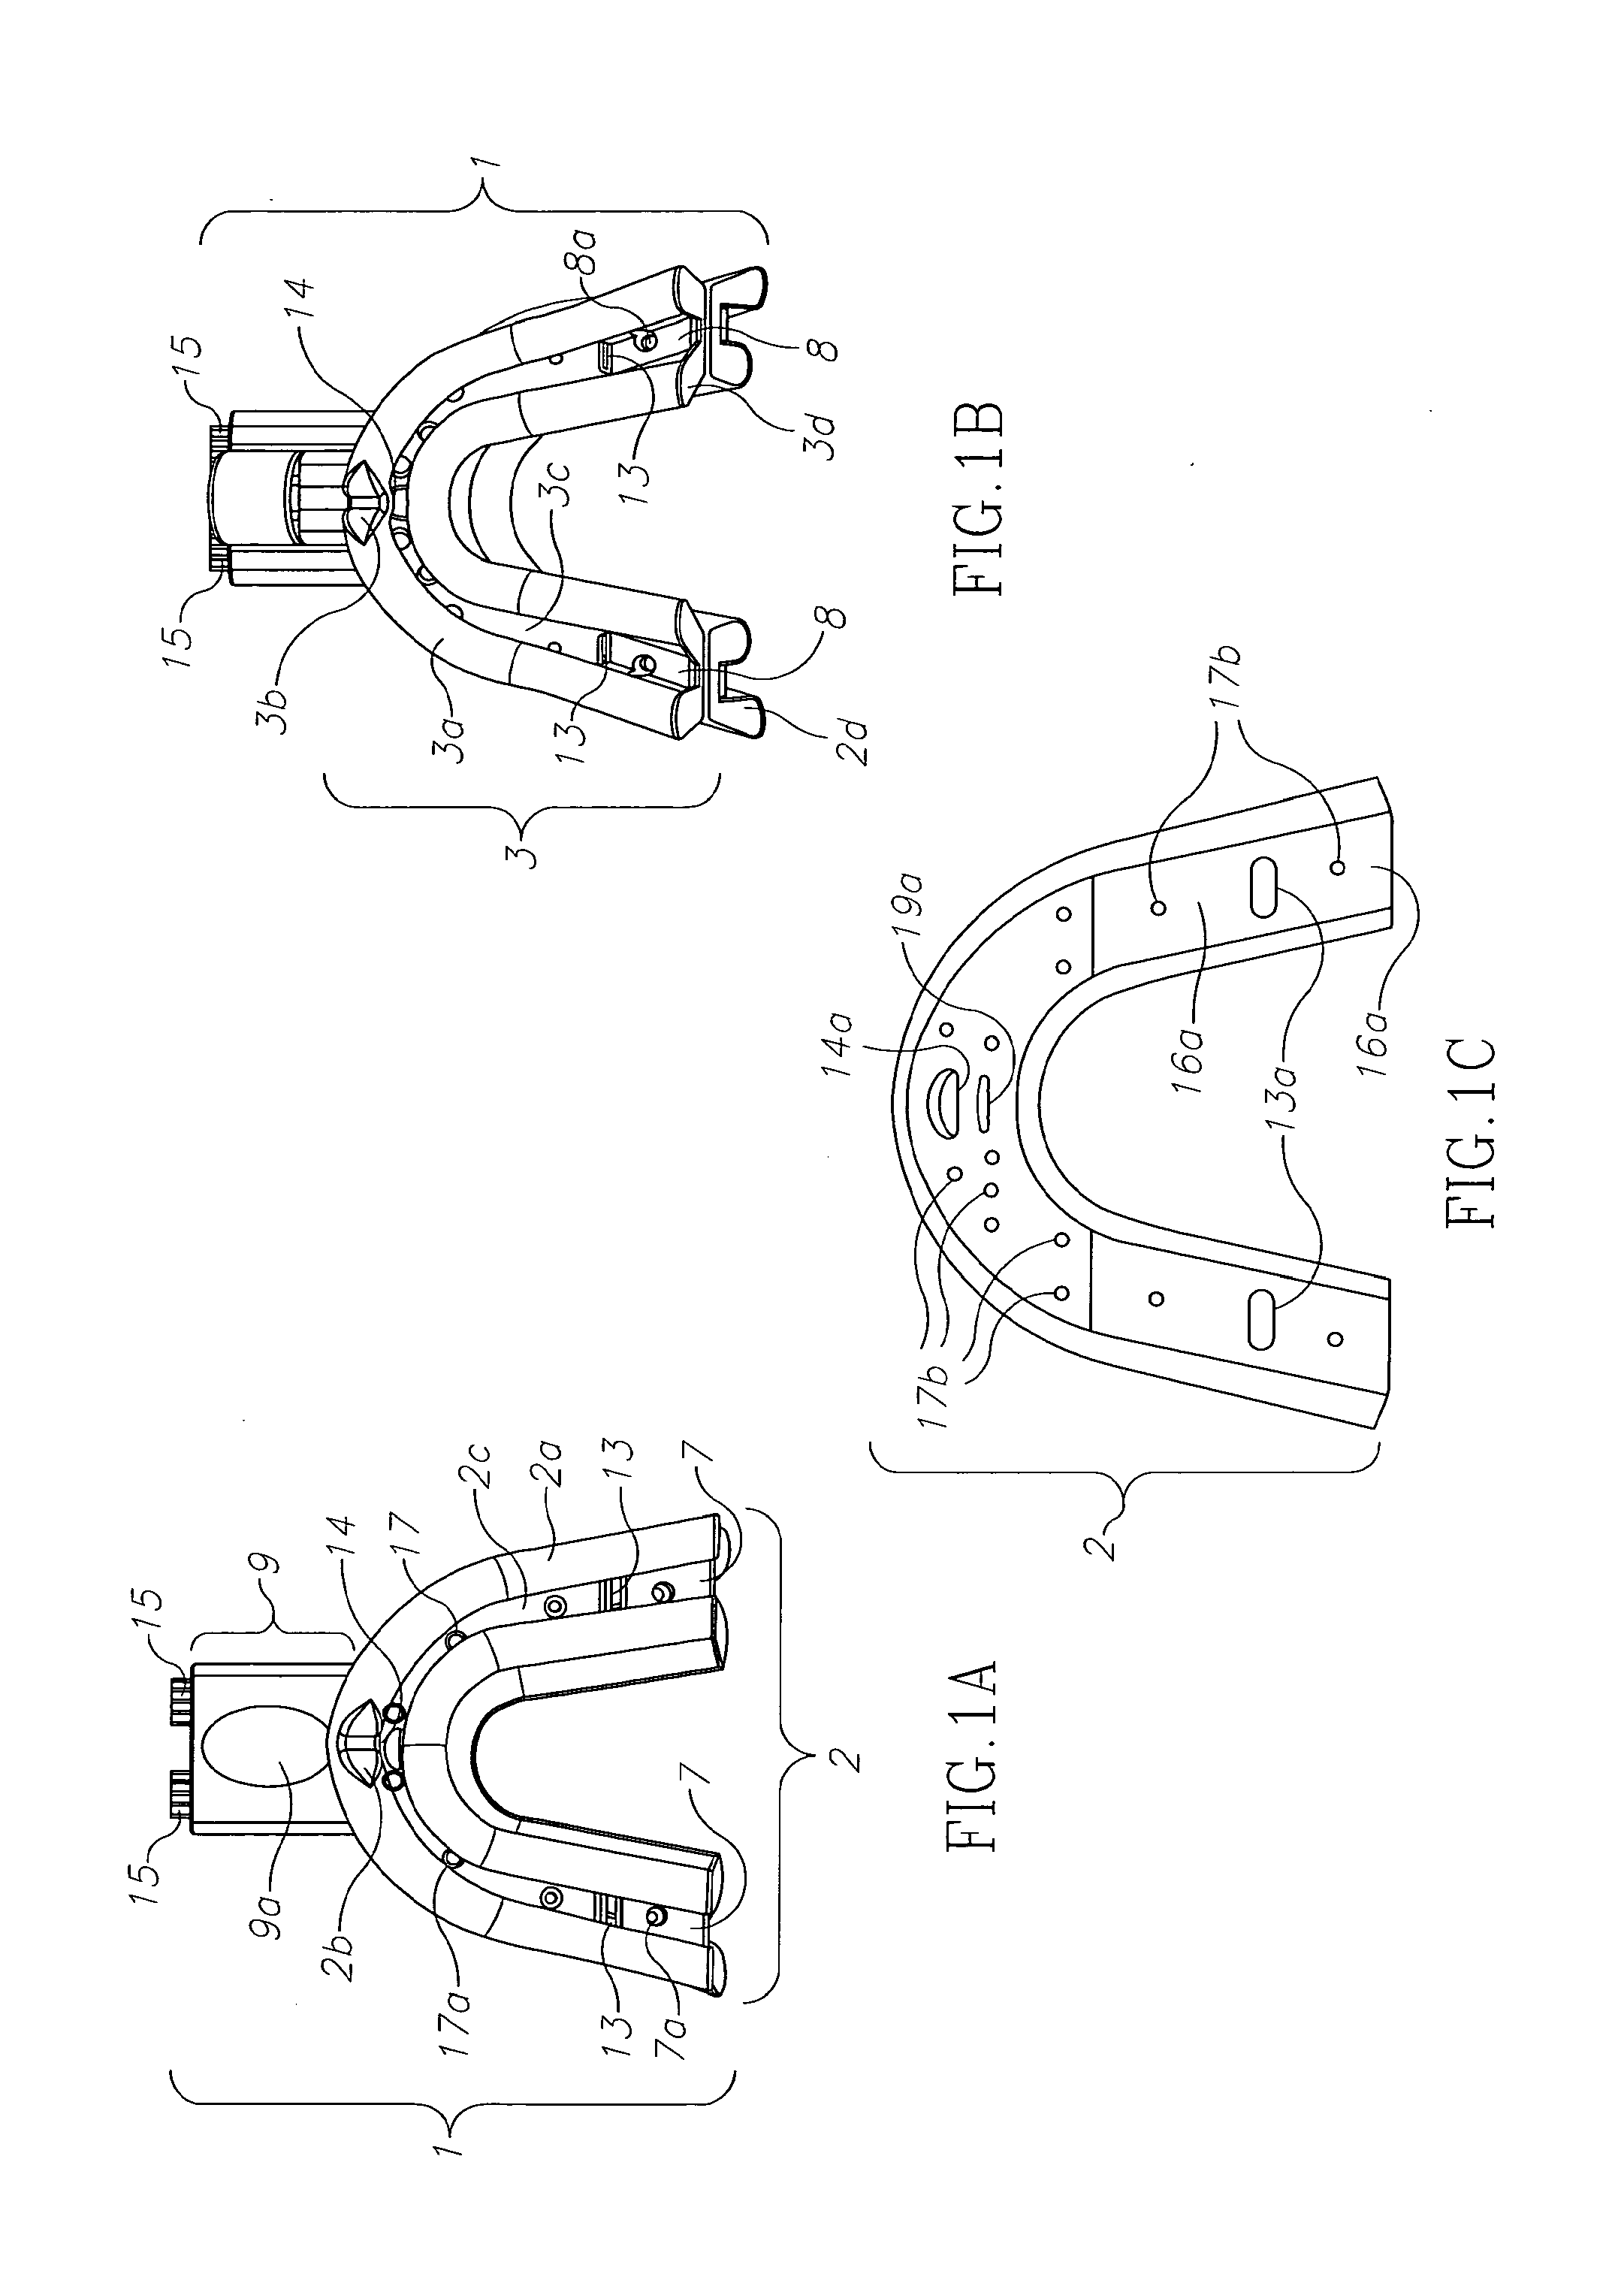 Devices, systems and methods for the whitening of teeth